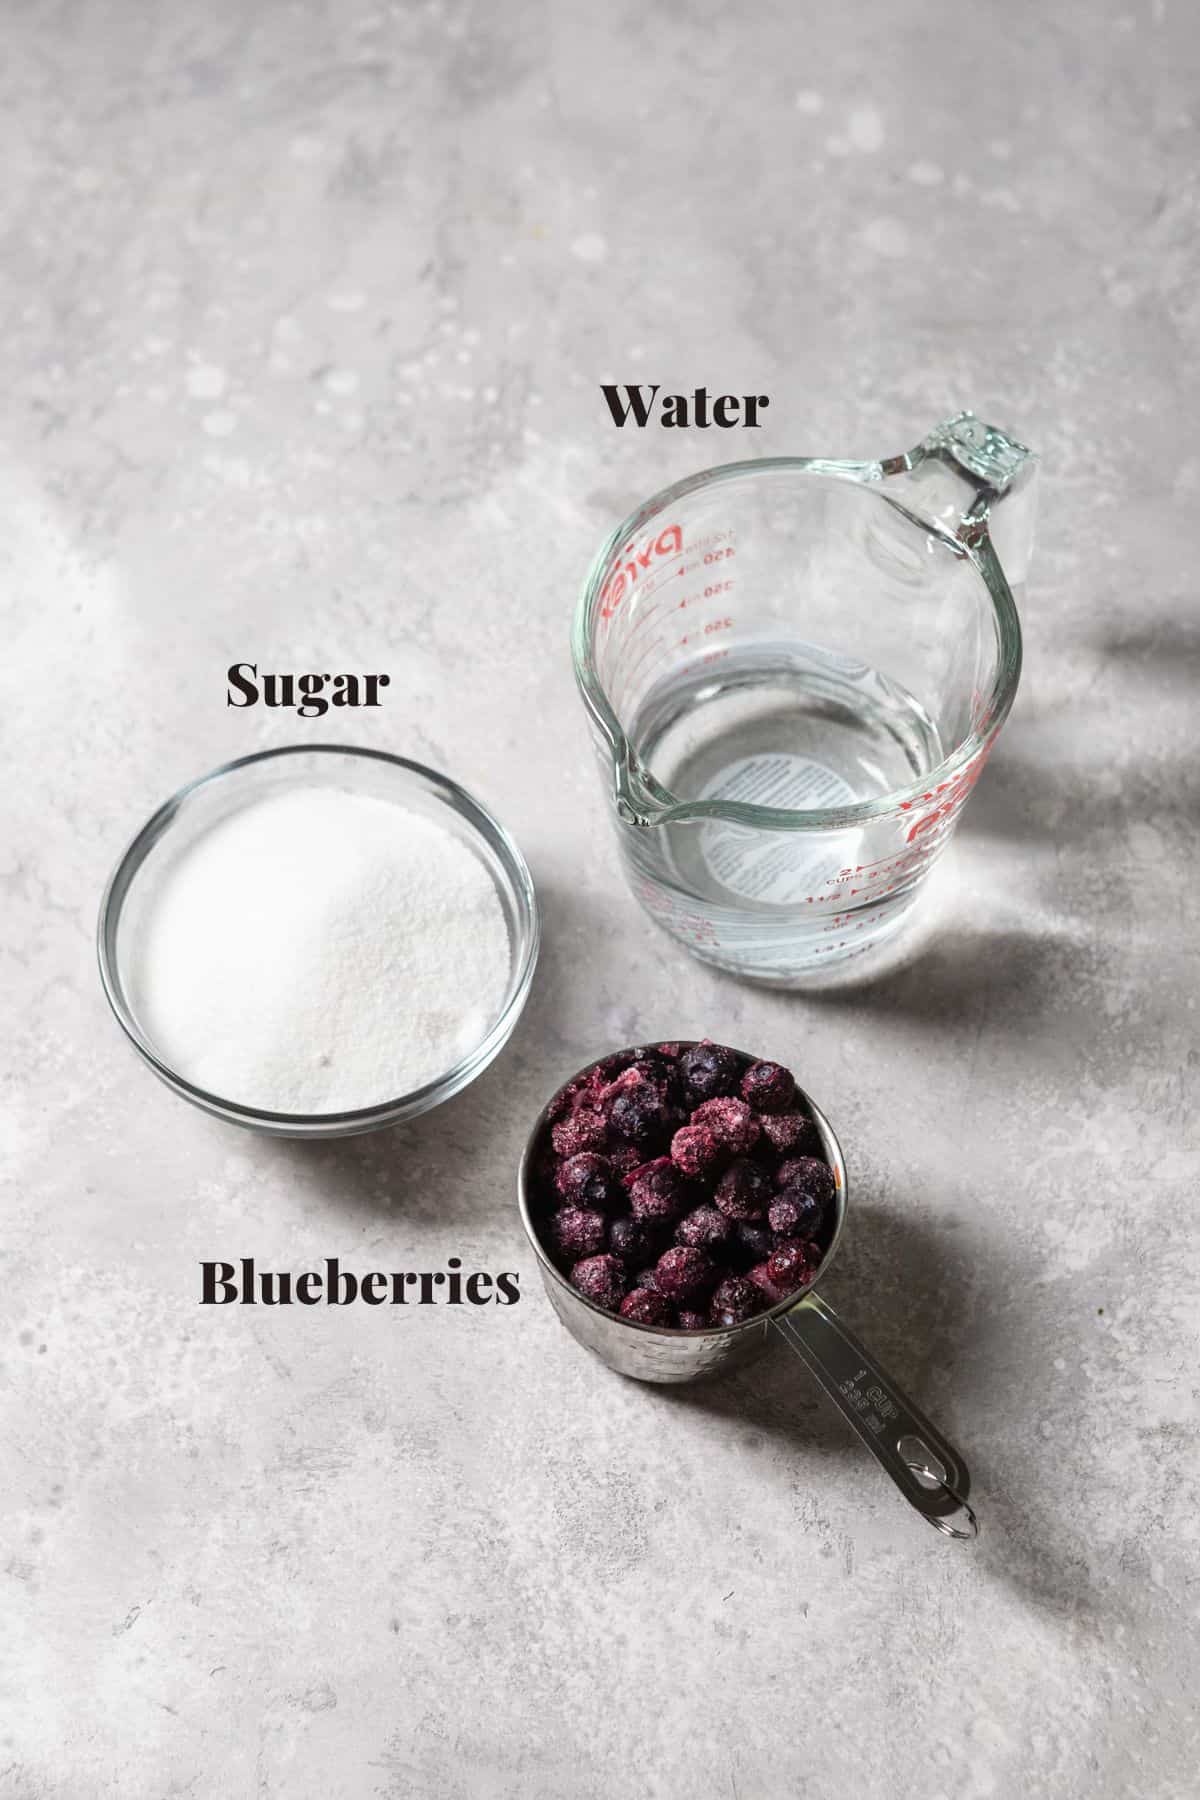 Ingredients to make blueberry simple syrup.